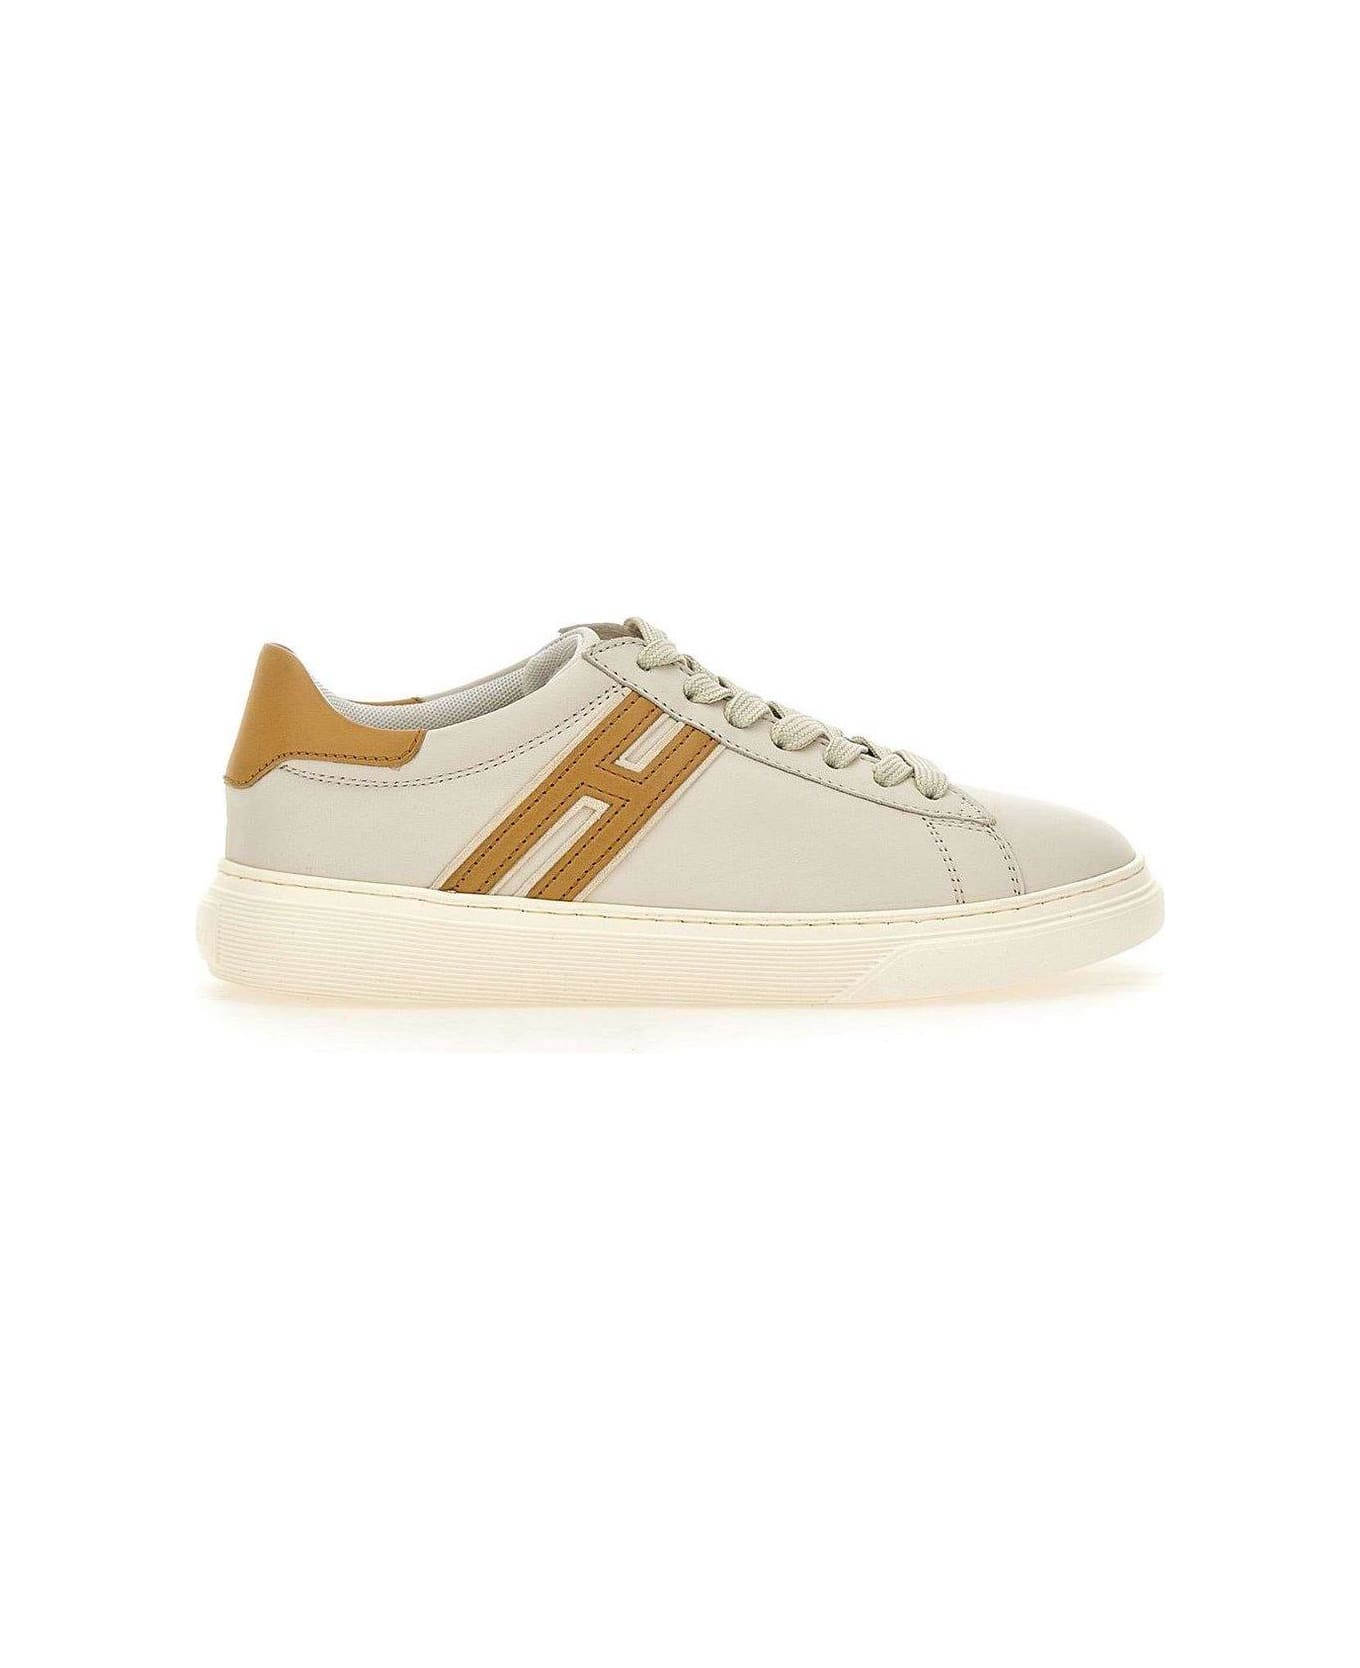 Hogan Sneakers "h365" Made Of Leather - WHITE/ Brown